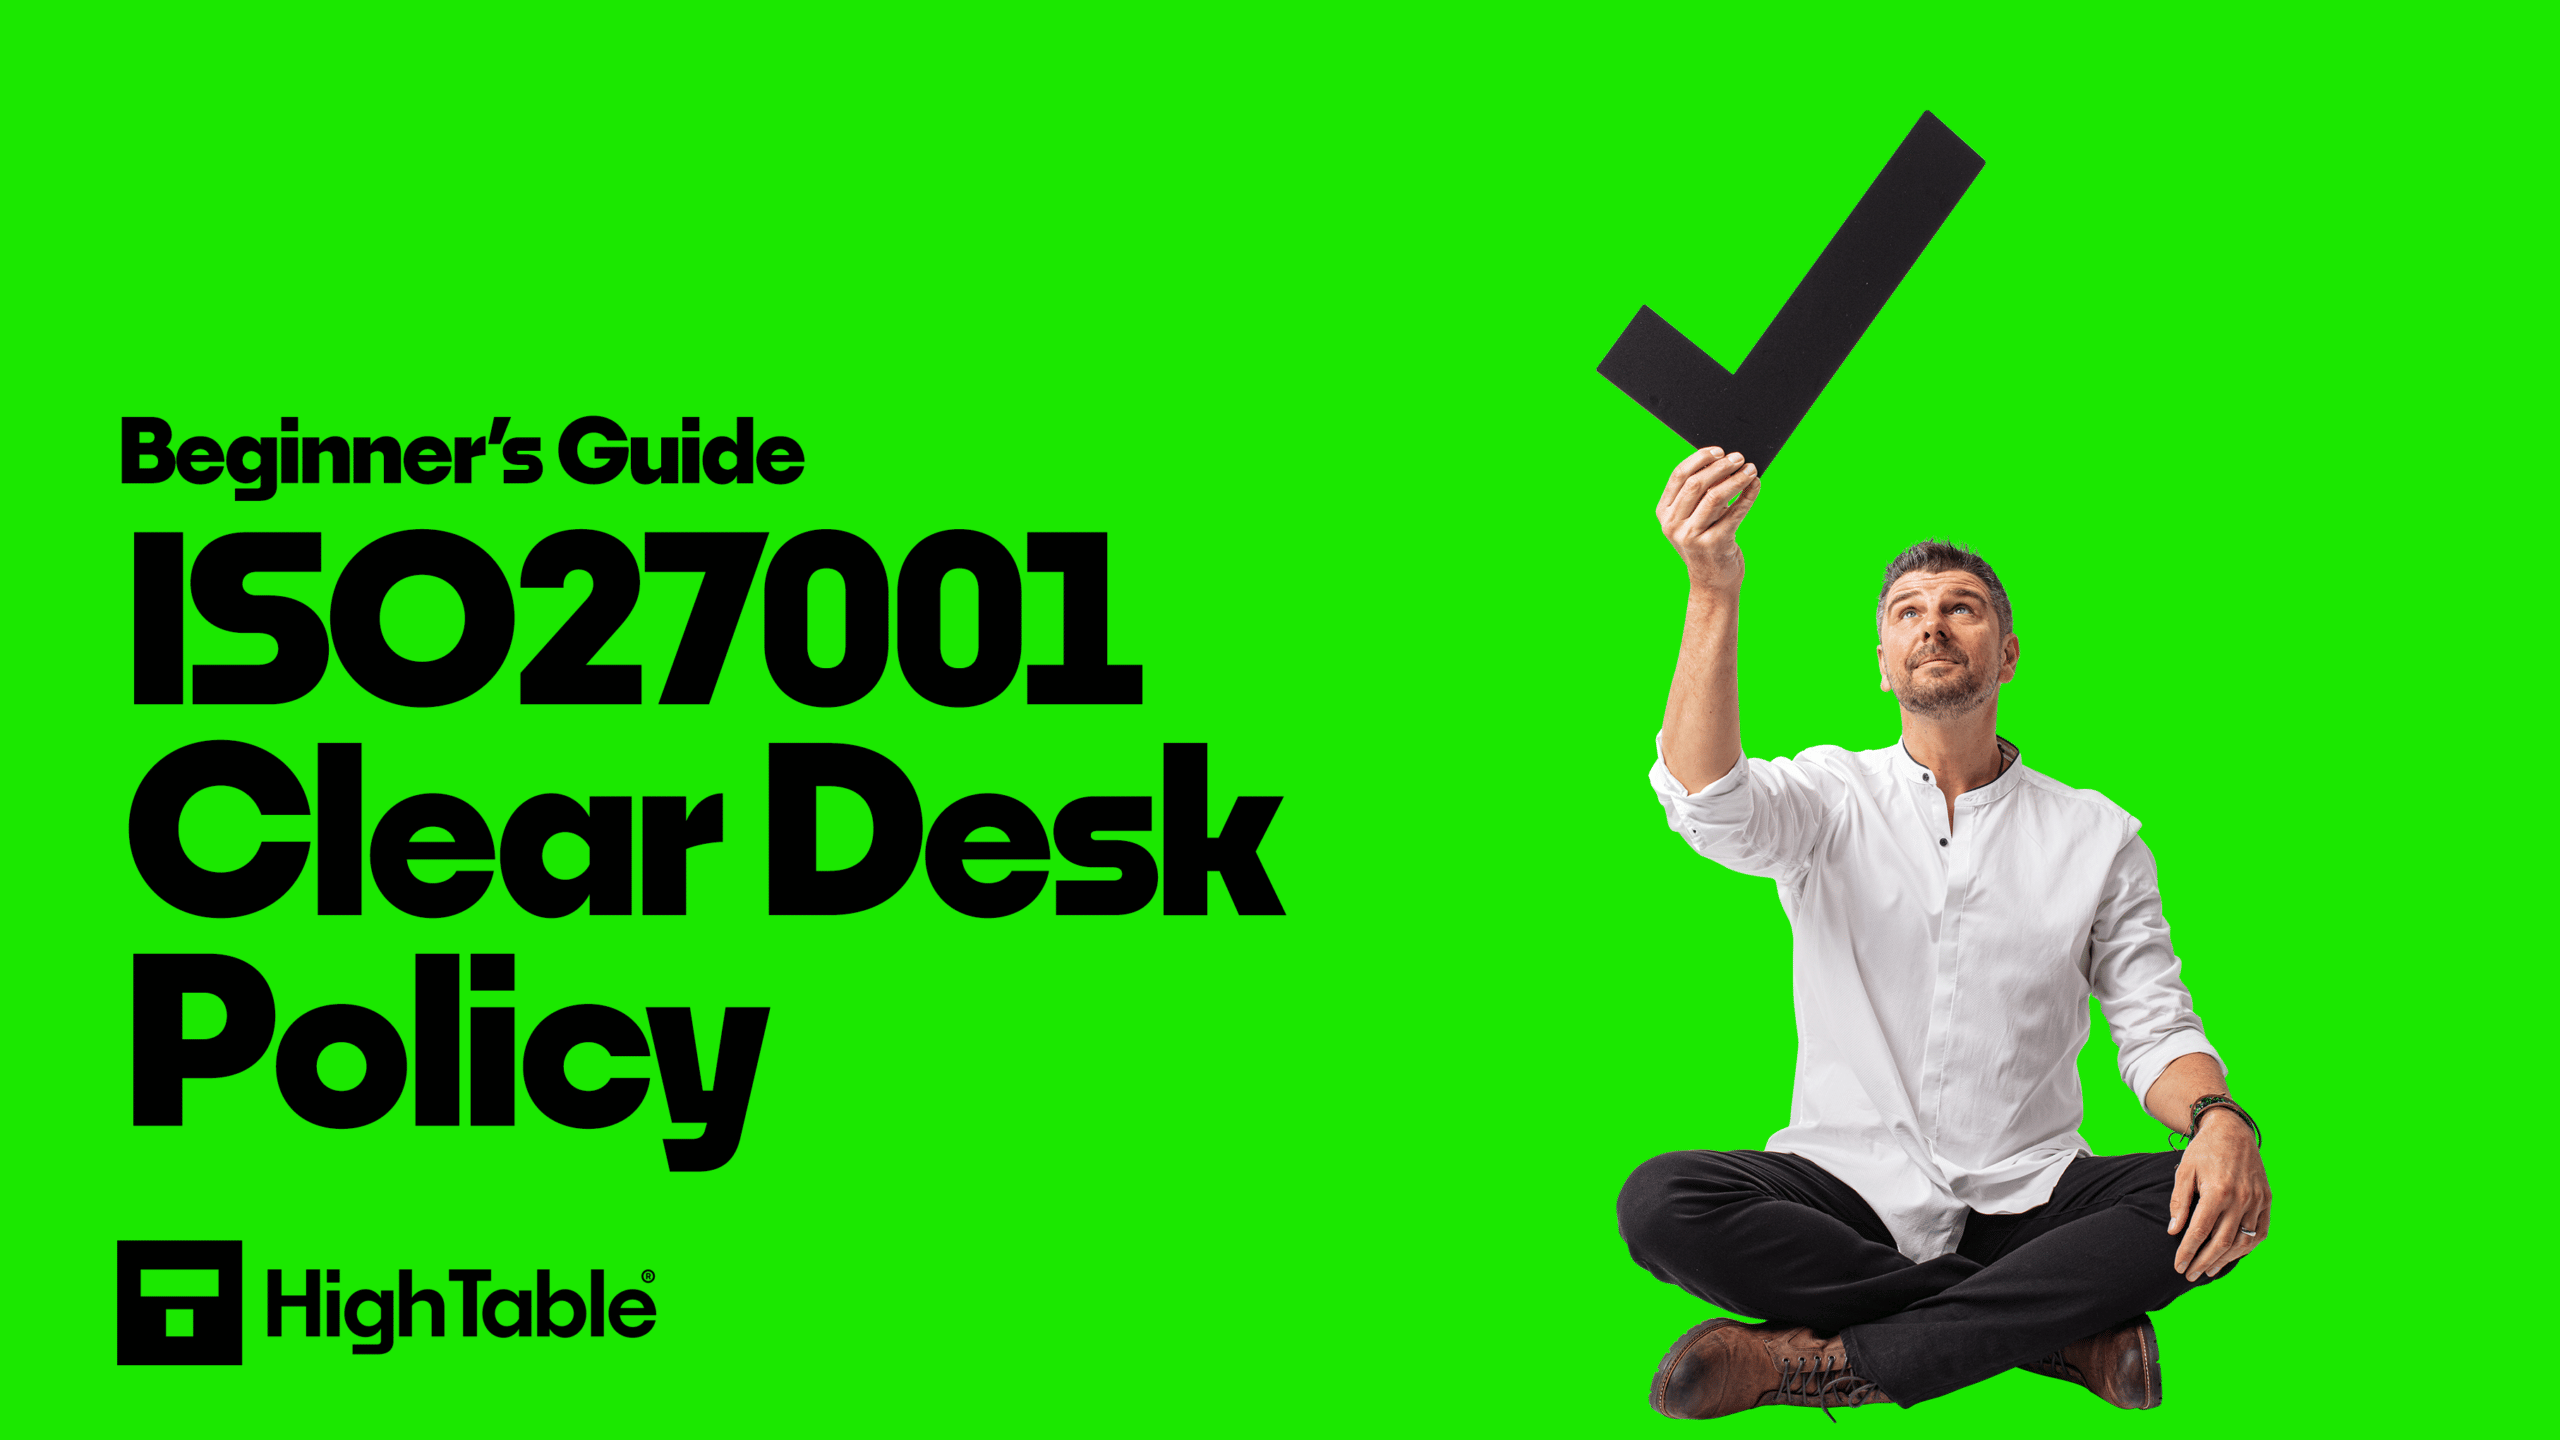 ISO 27001 Clear Desk Policy Beginner's Guide